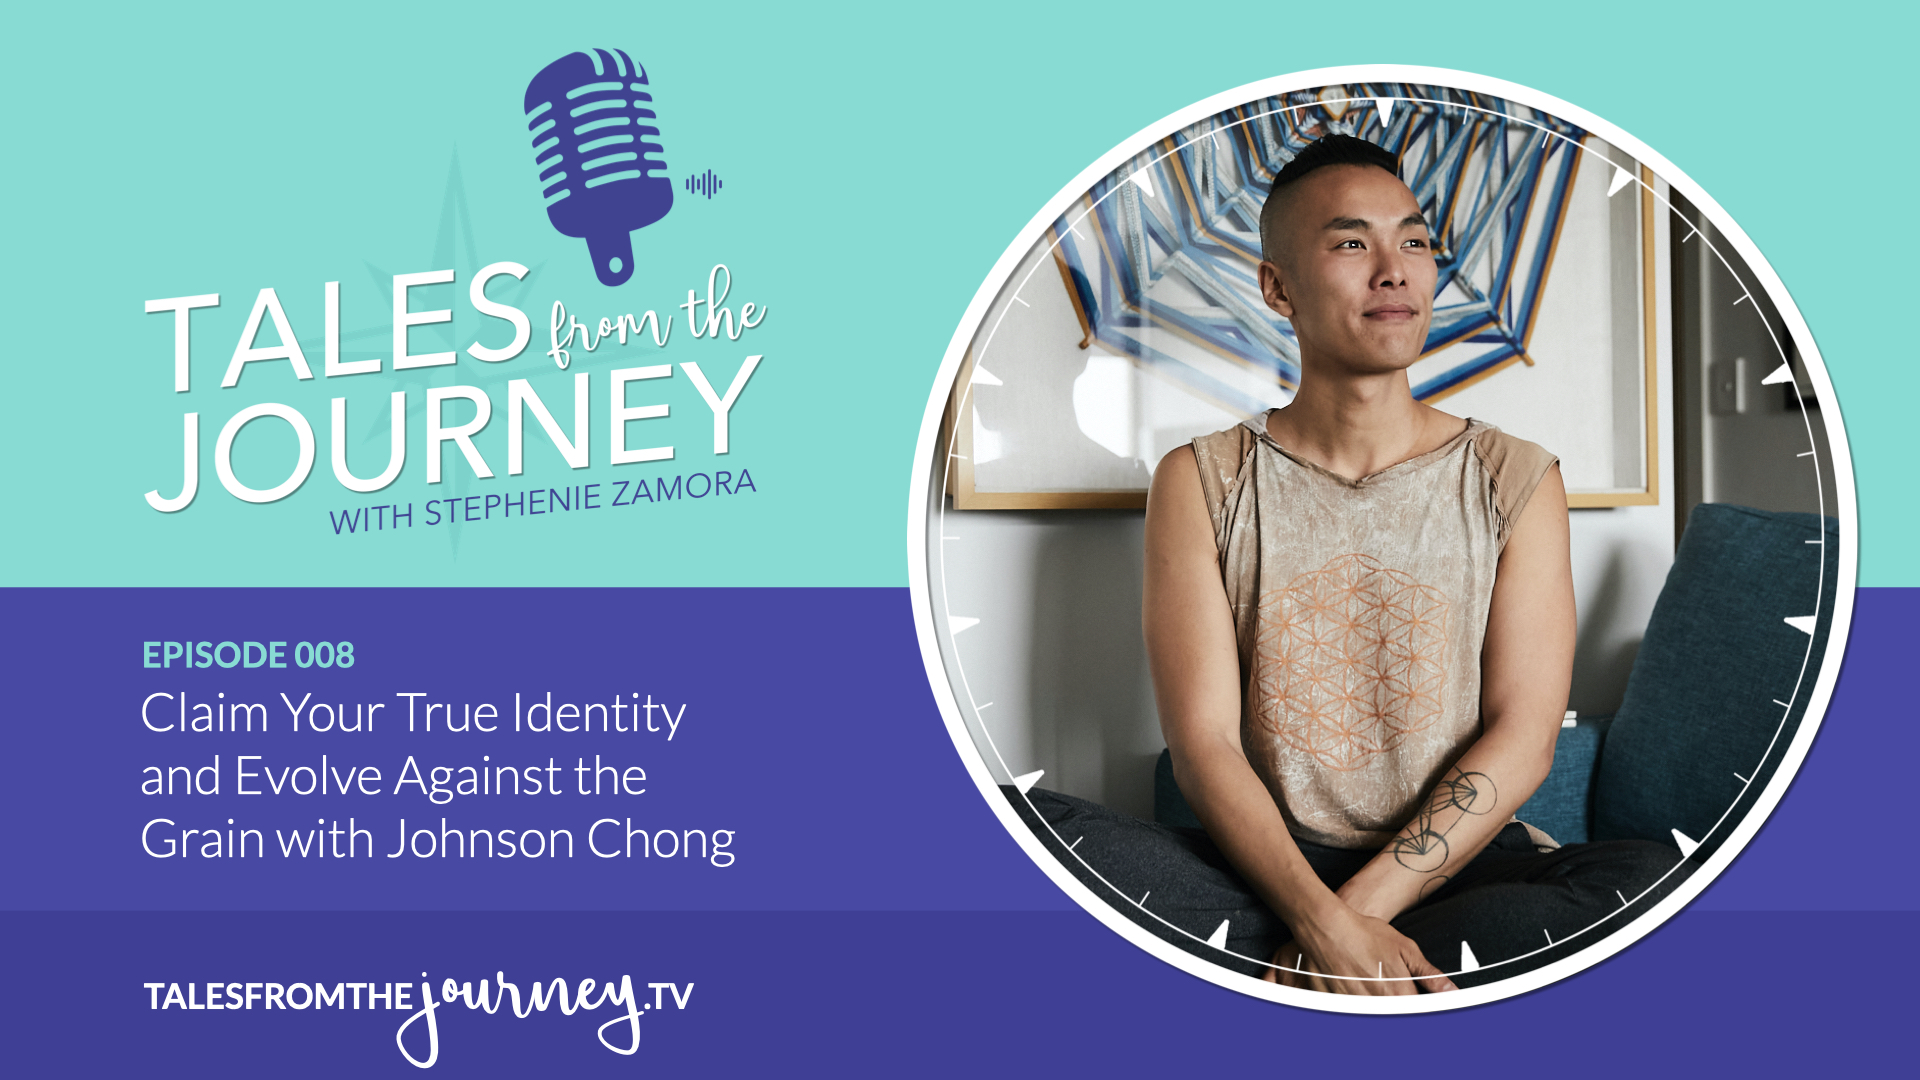 Claim Your True Identity with Johnson Chong